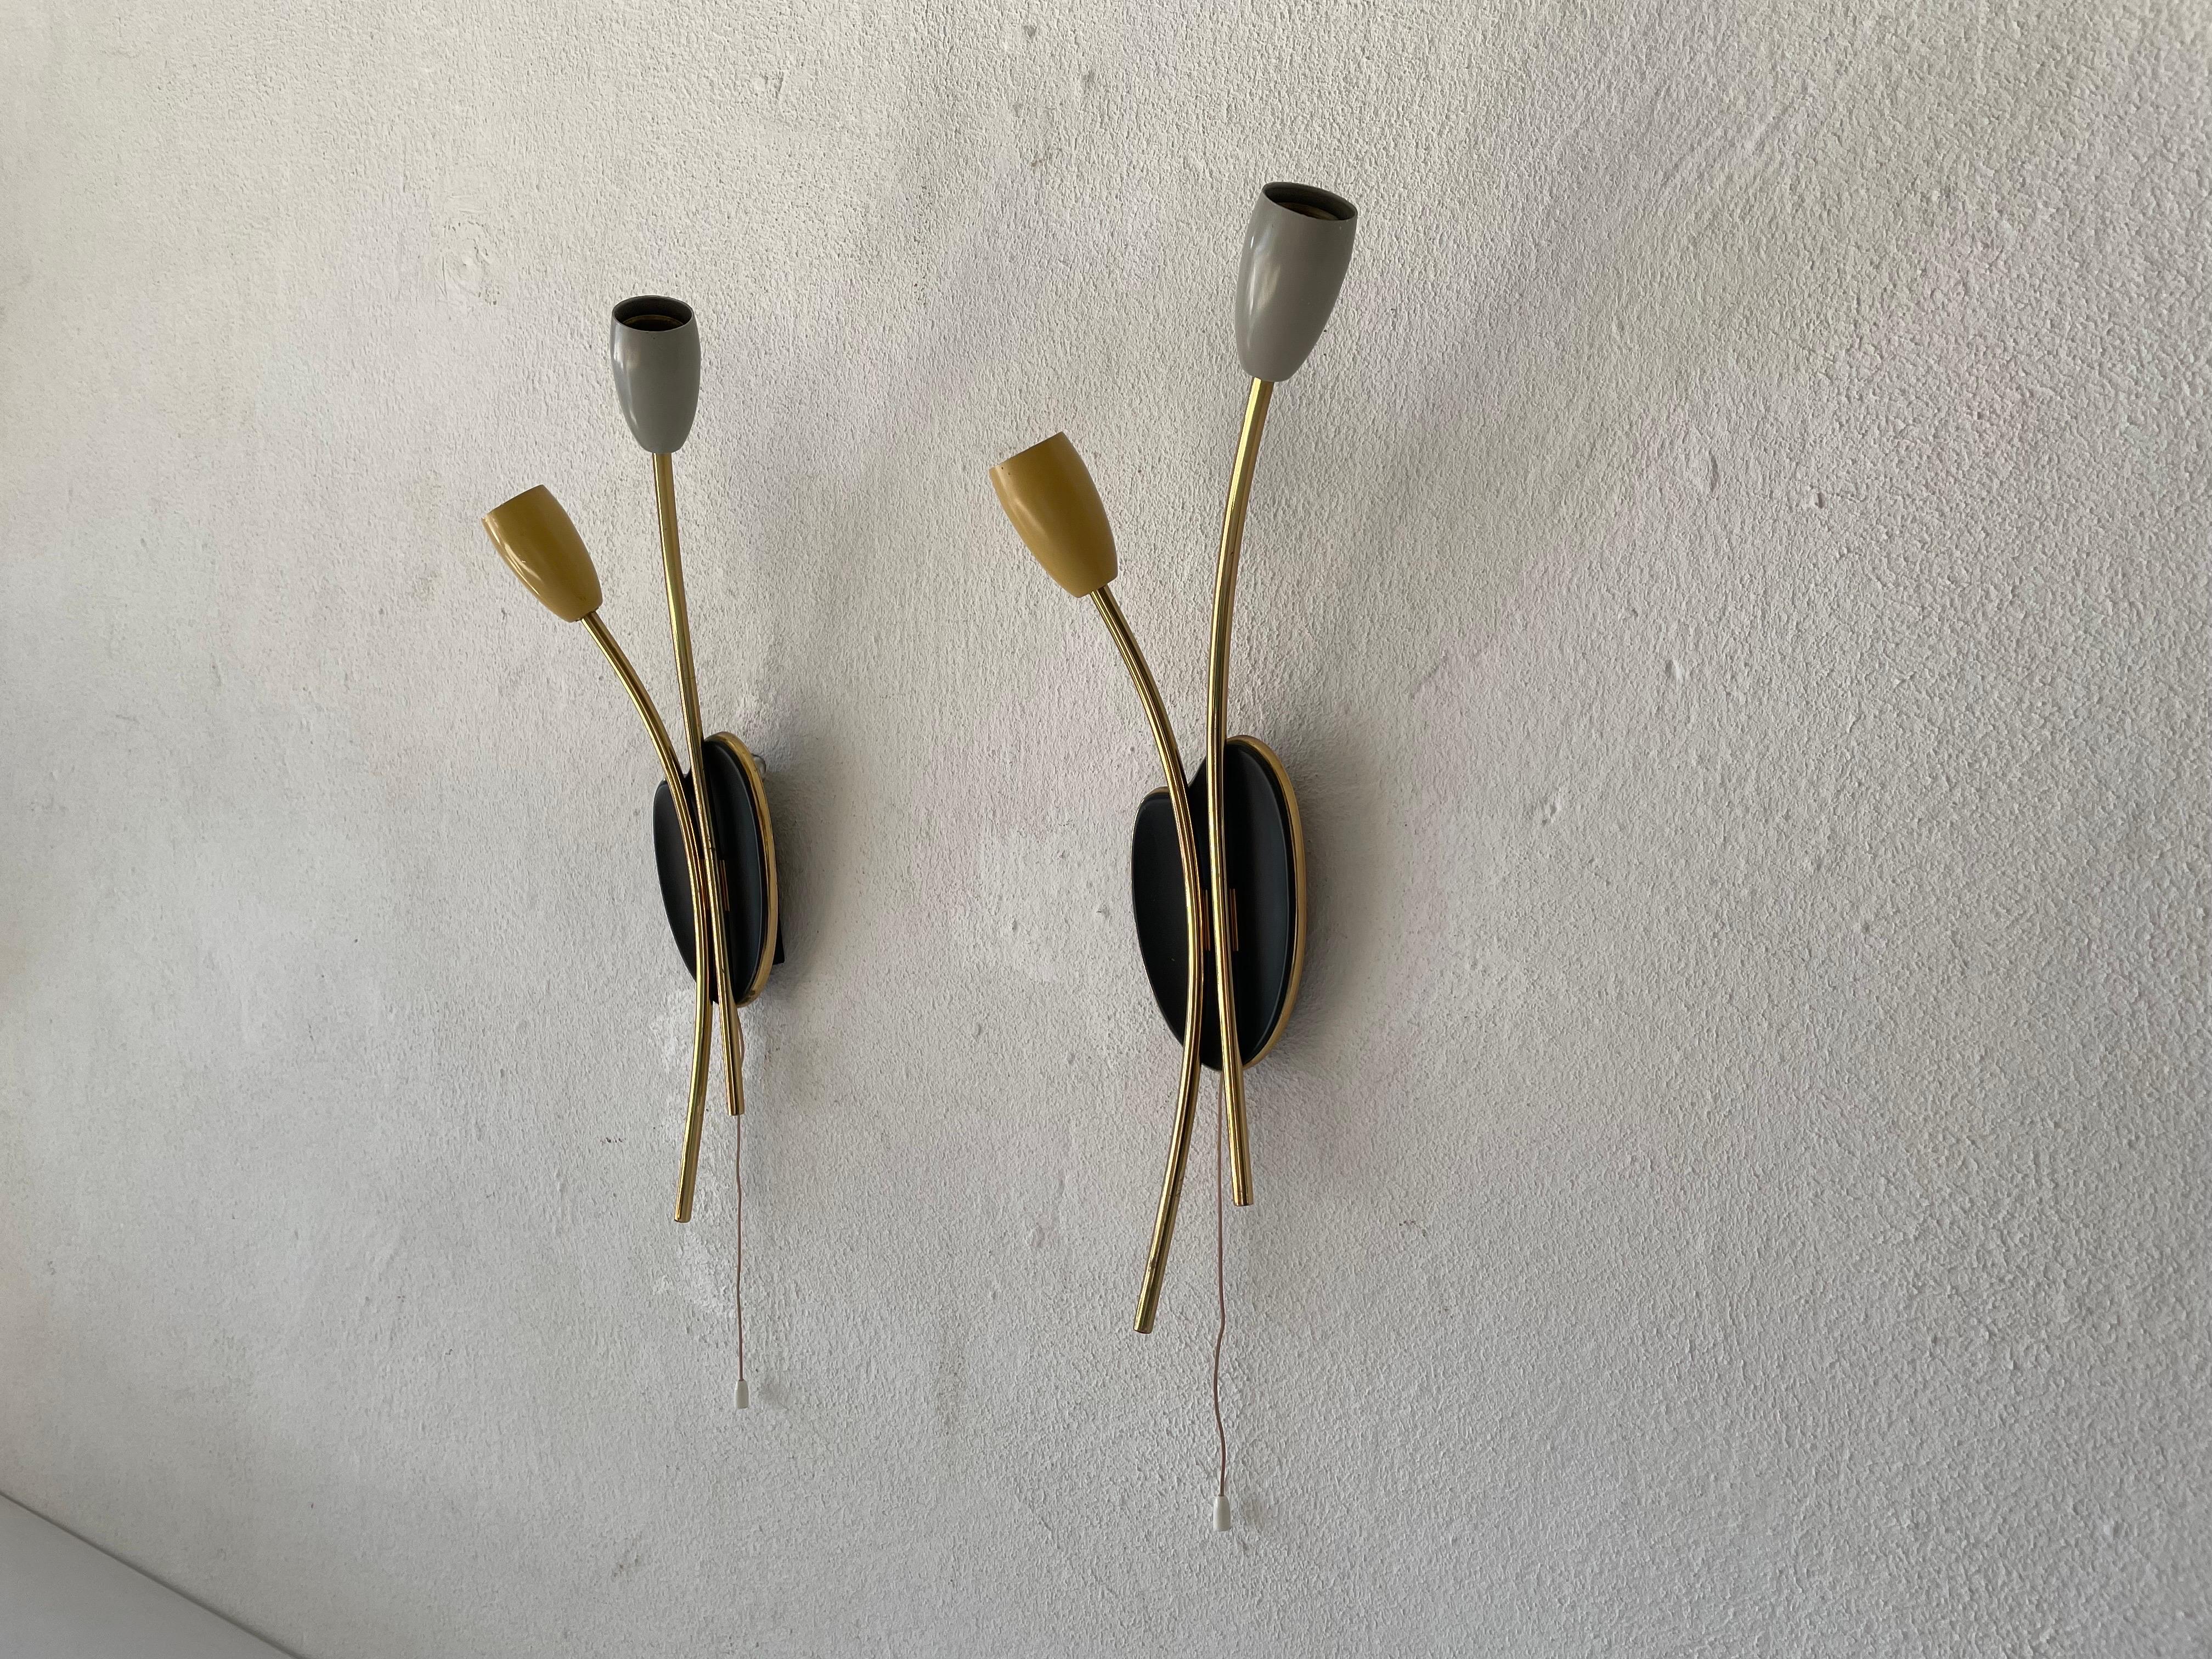 Mid-century yellow-grey pair of sputnik sconces, 1950s, Germany

Very elegant and Minimalist wall lamps
Lamp is in very good condition.

These lamps works with E14 standard light bulbs. 
Wired and suitable to use in all countries. (110-220